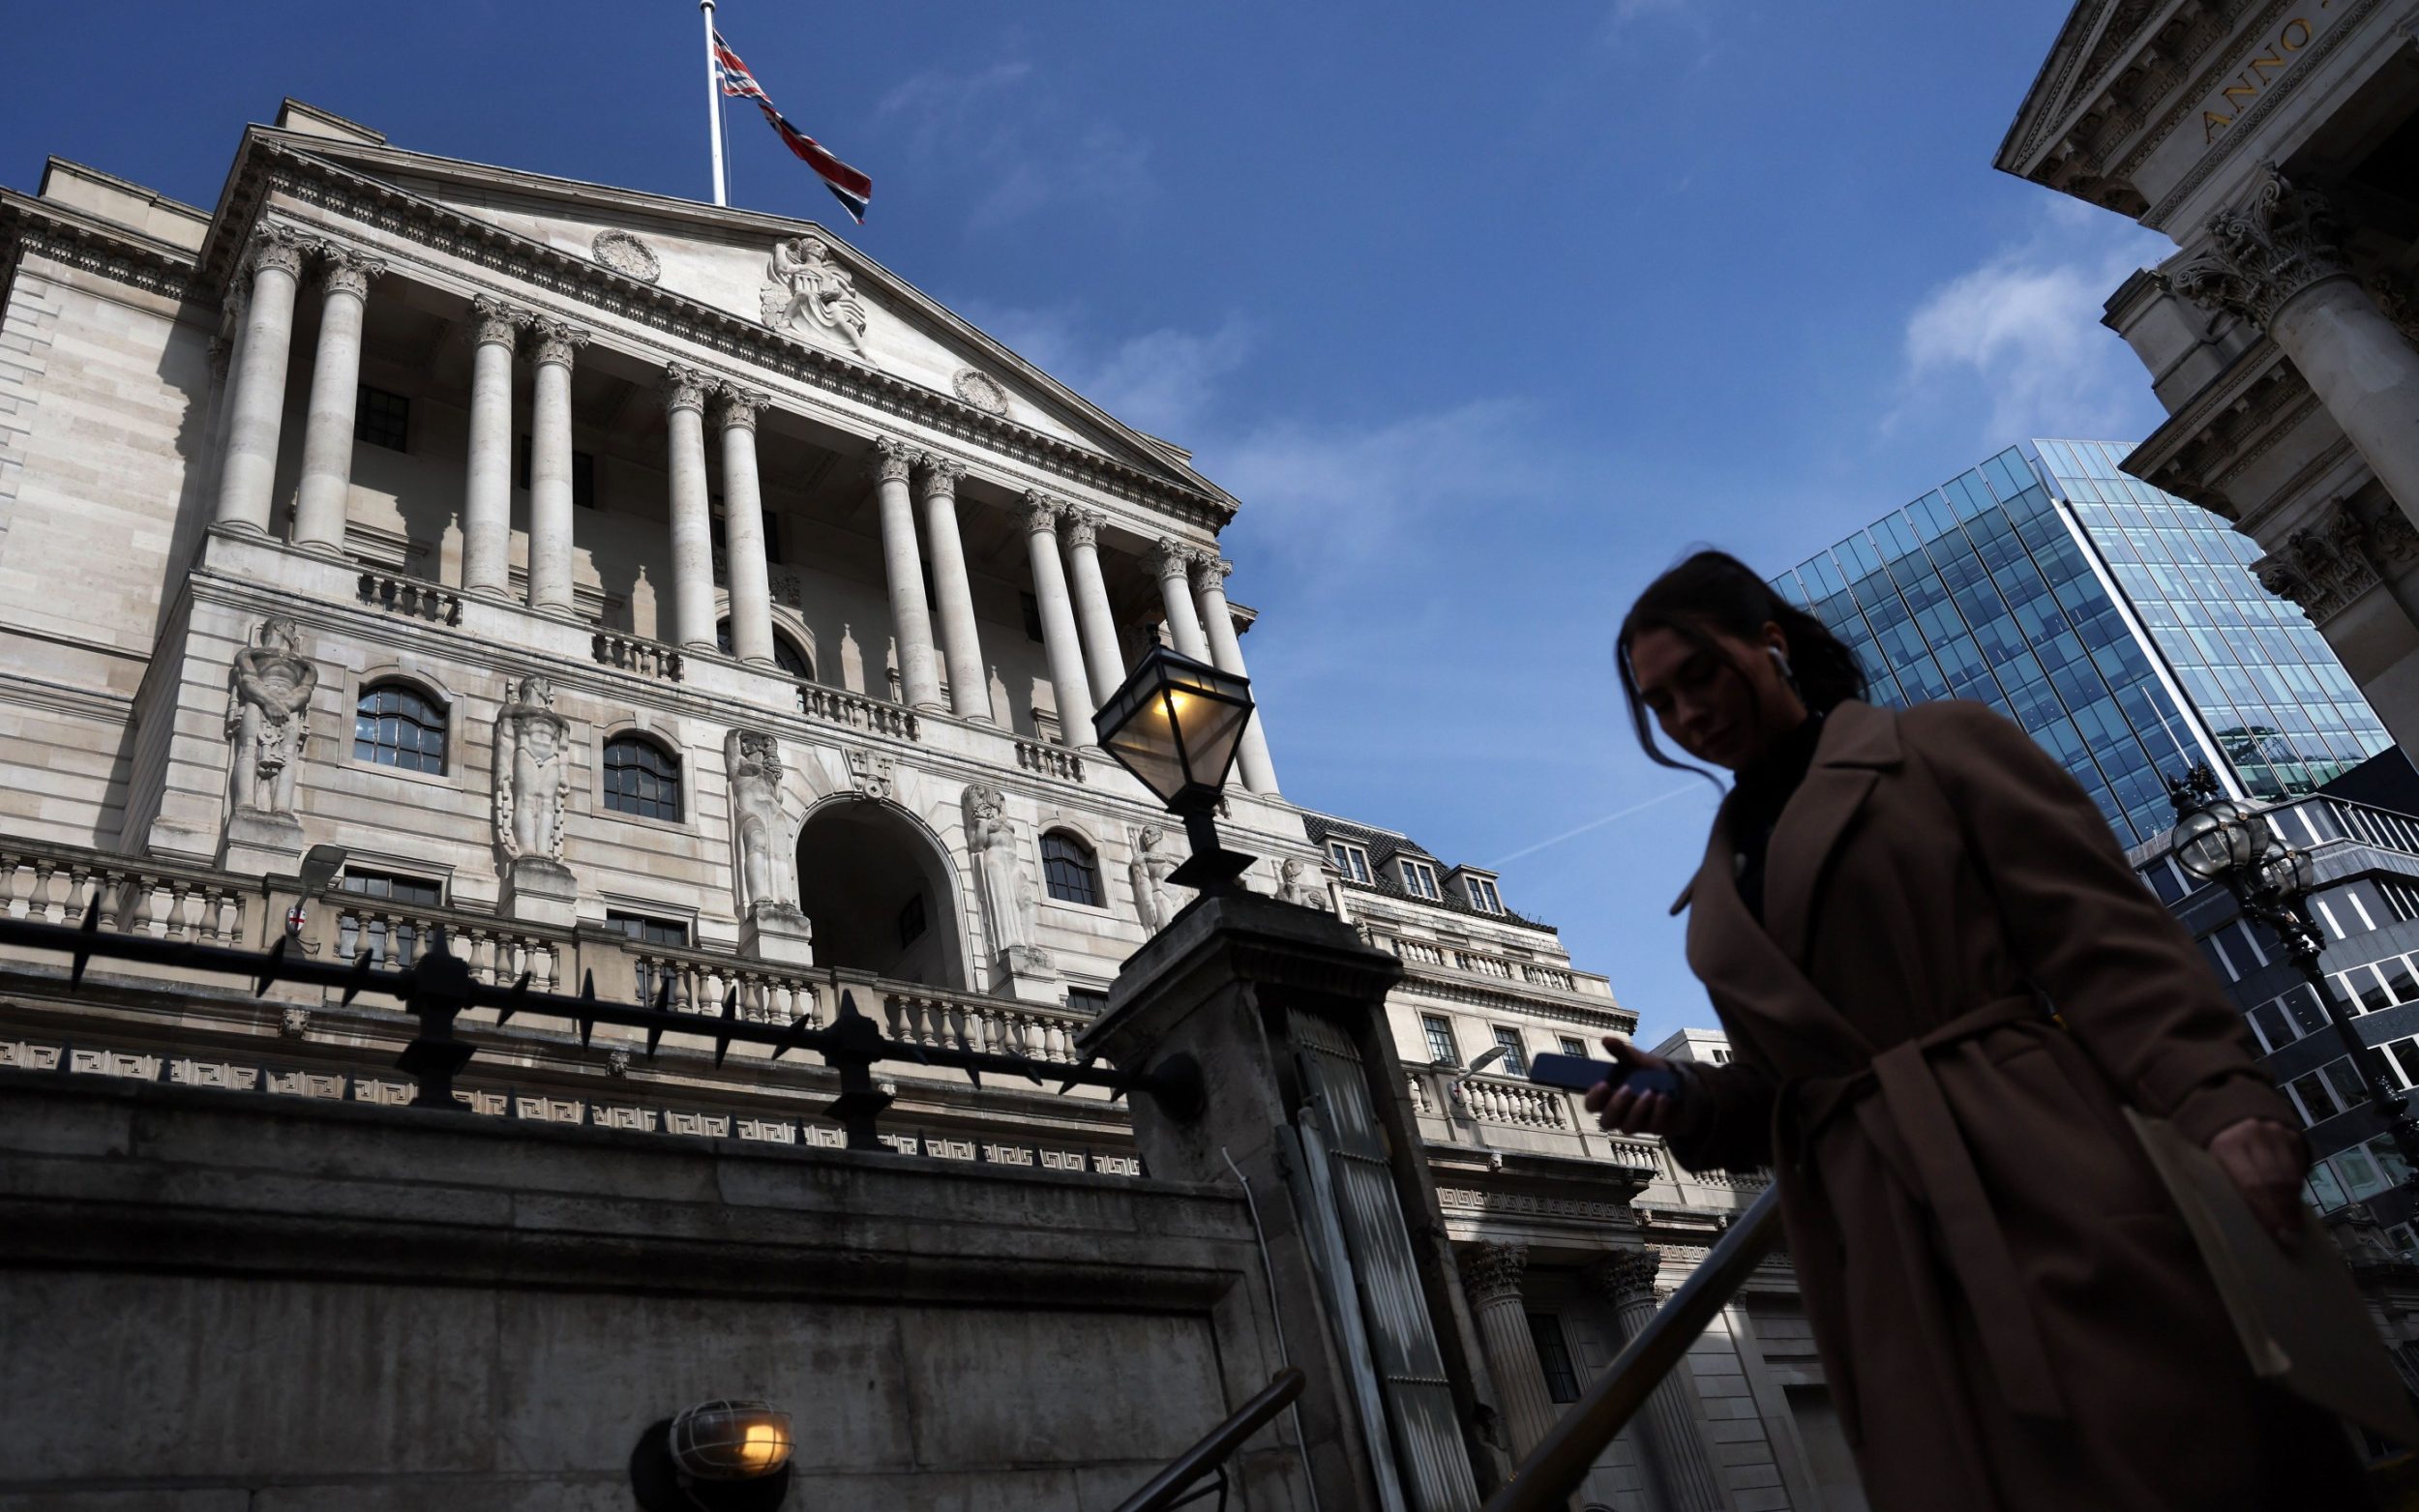 taxpayer to fork out £85bn to cover bank of england losses